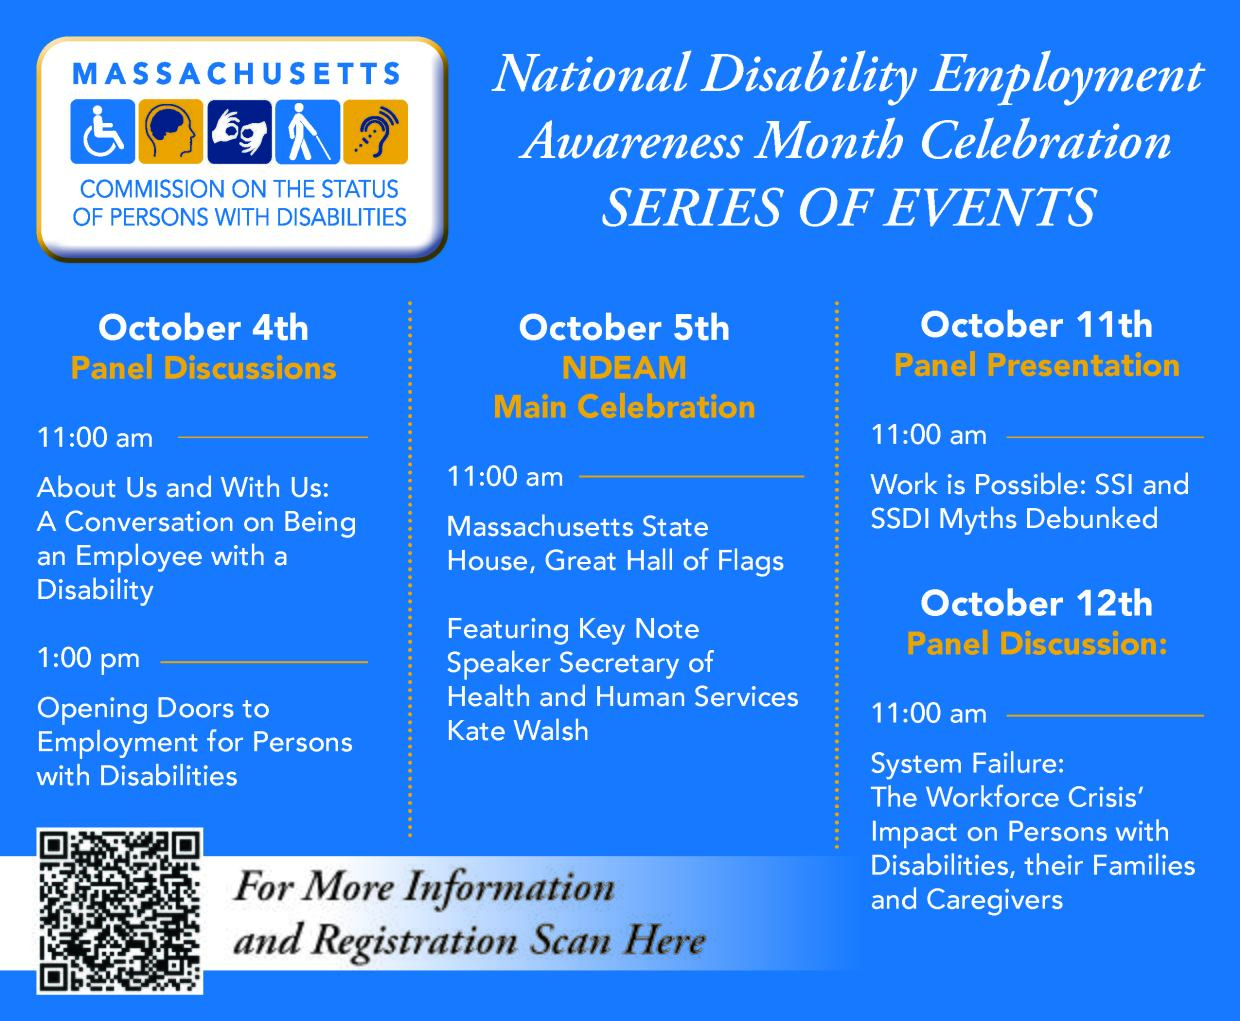 Picture of the National Disability Employment Awareness Month Celebration Series of Events and Schedule flier on light blue background and white font. Includes the Commission’s logo on the top left corner and a QR code to access registration links on the bottom left corner.